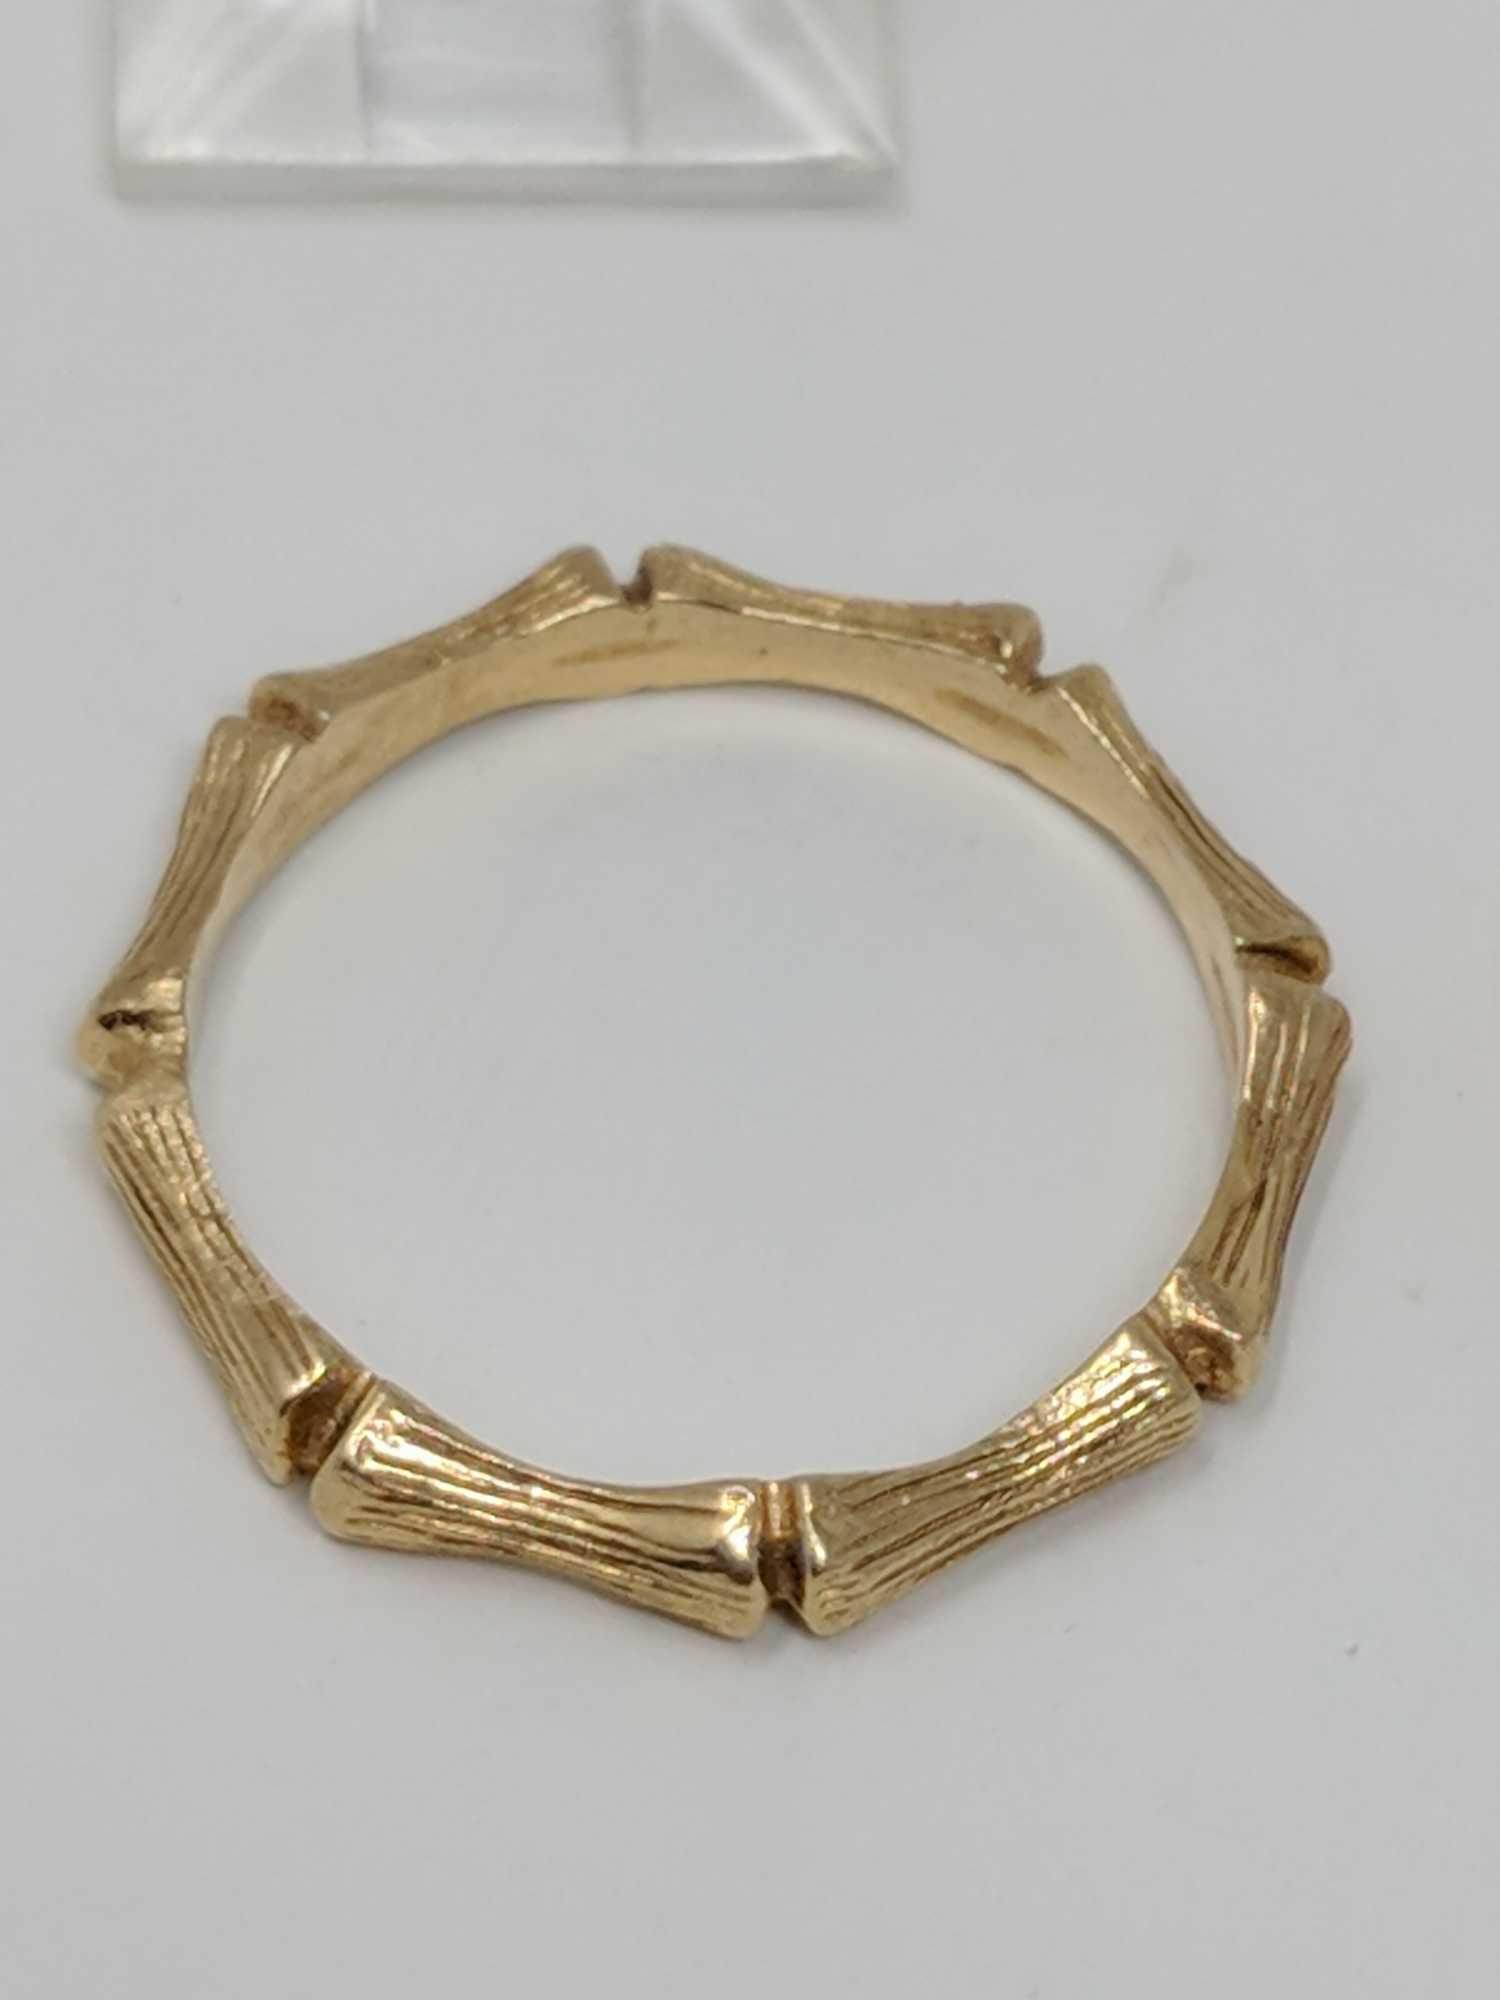 Three Gold Rings and Clasp